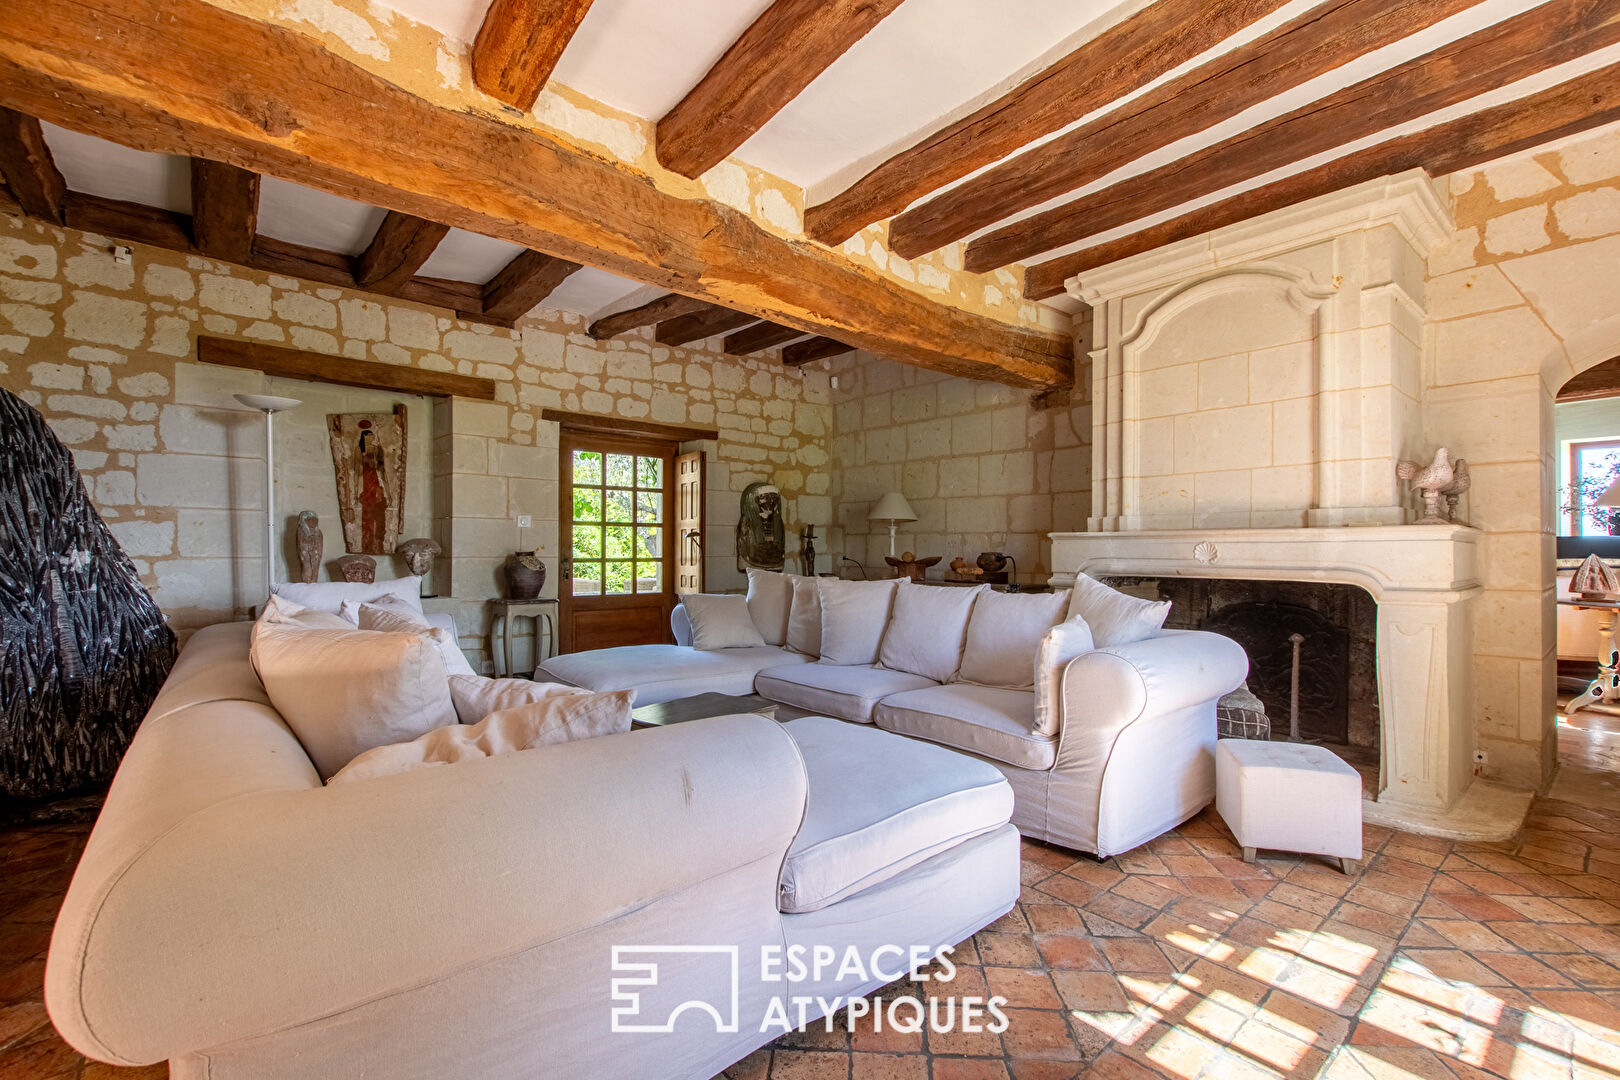 17th and 18th century stately property overlooking the Loire